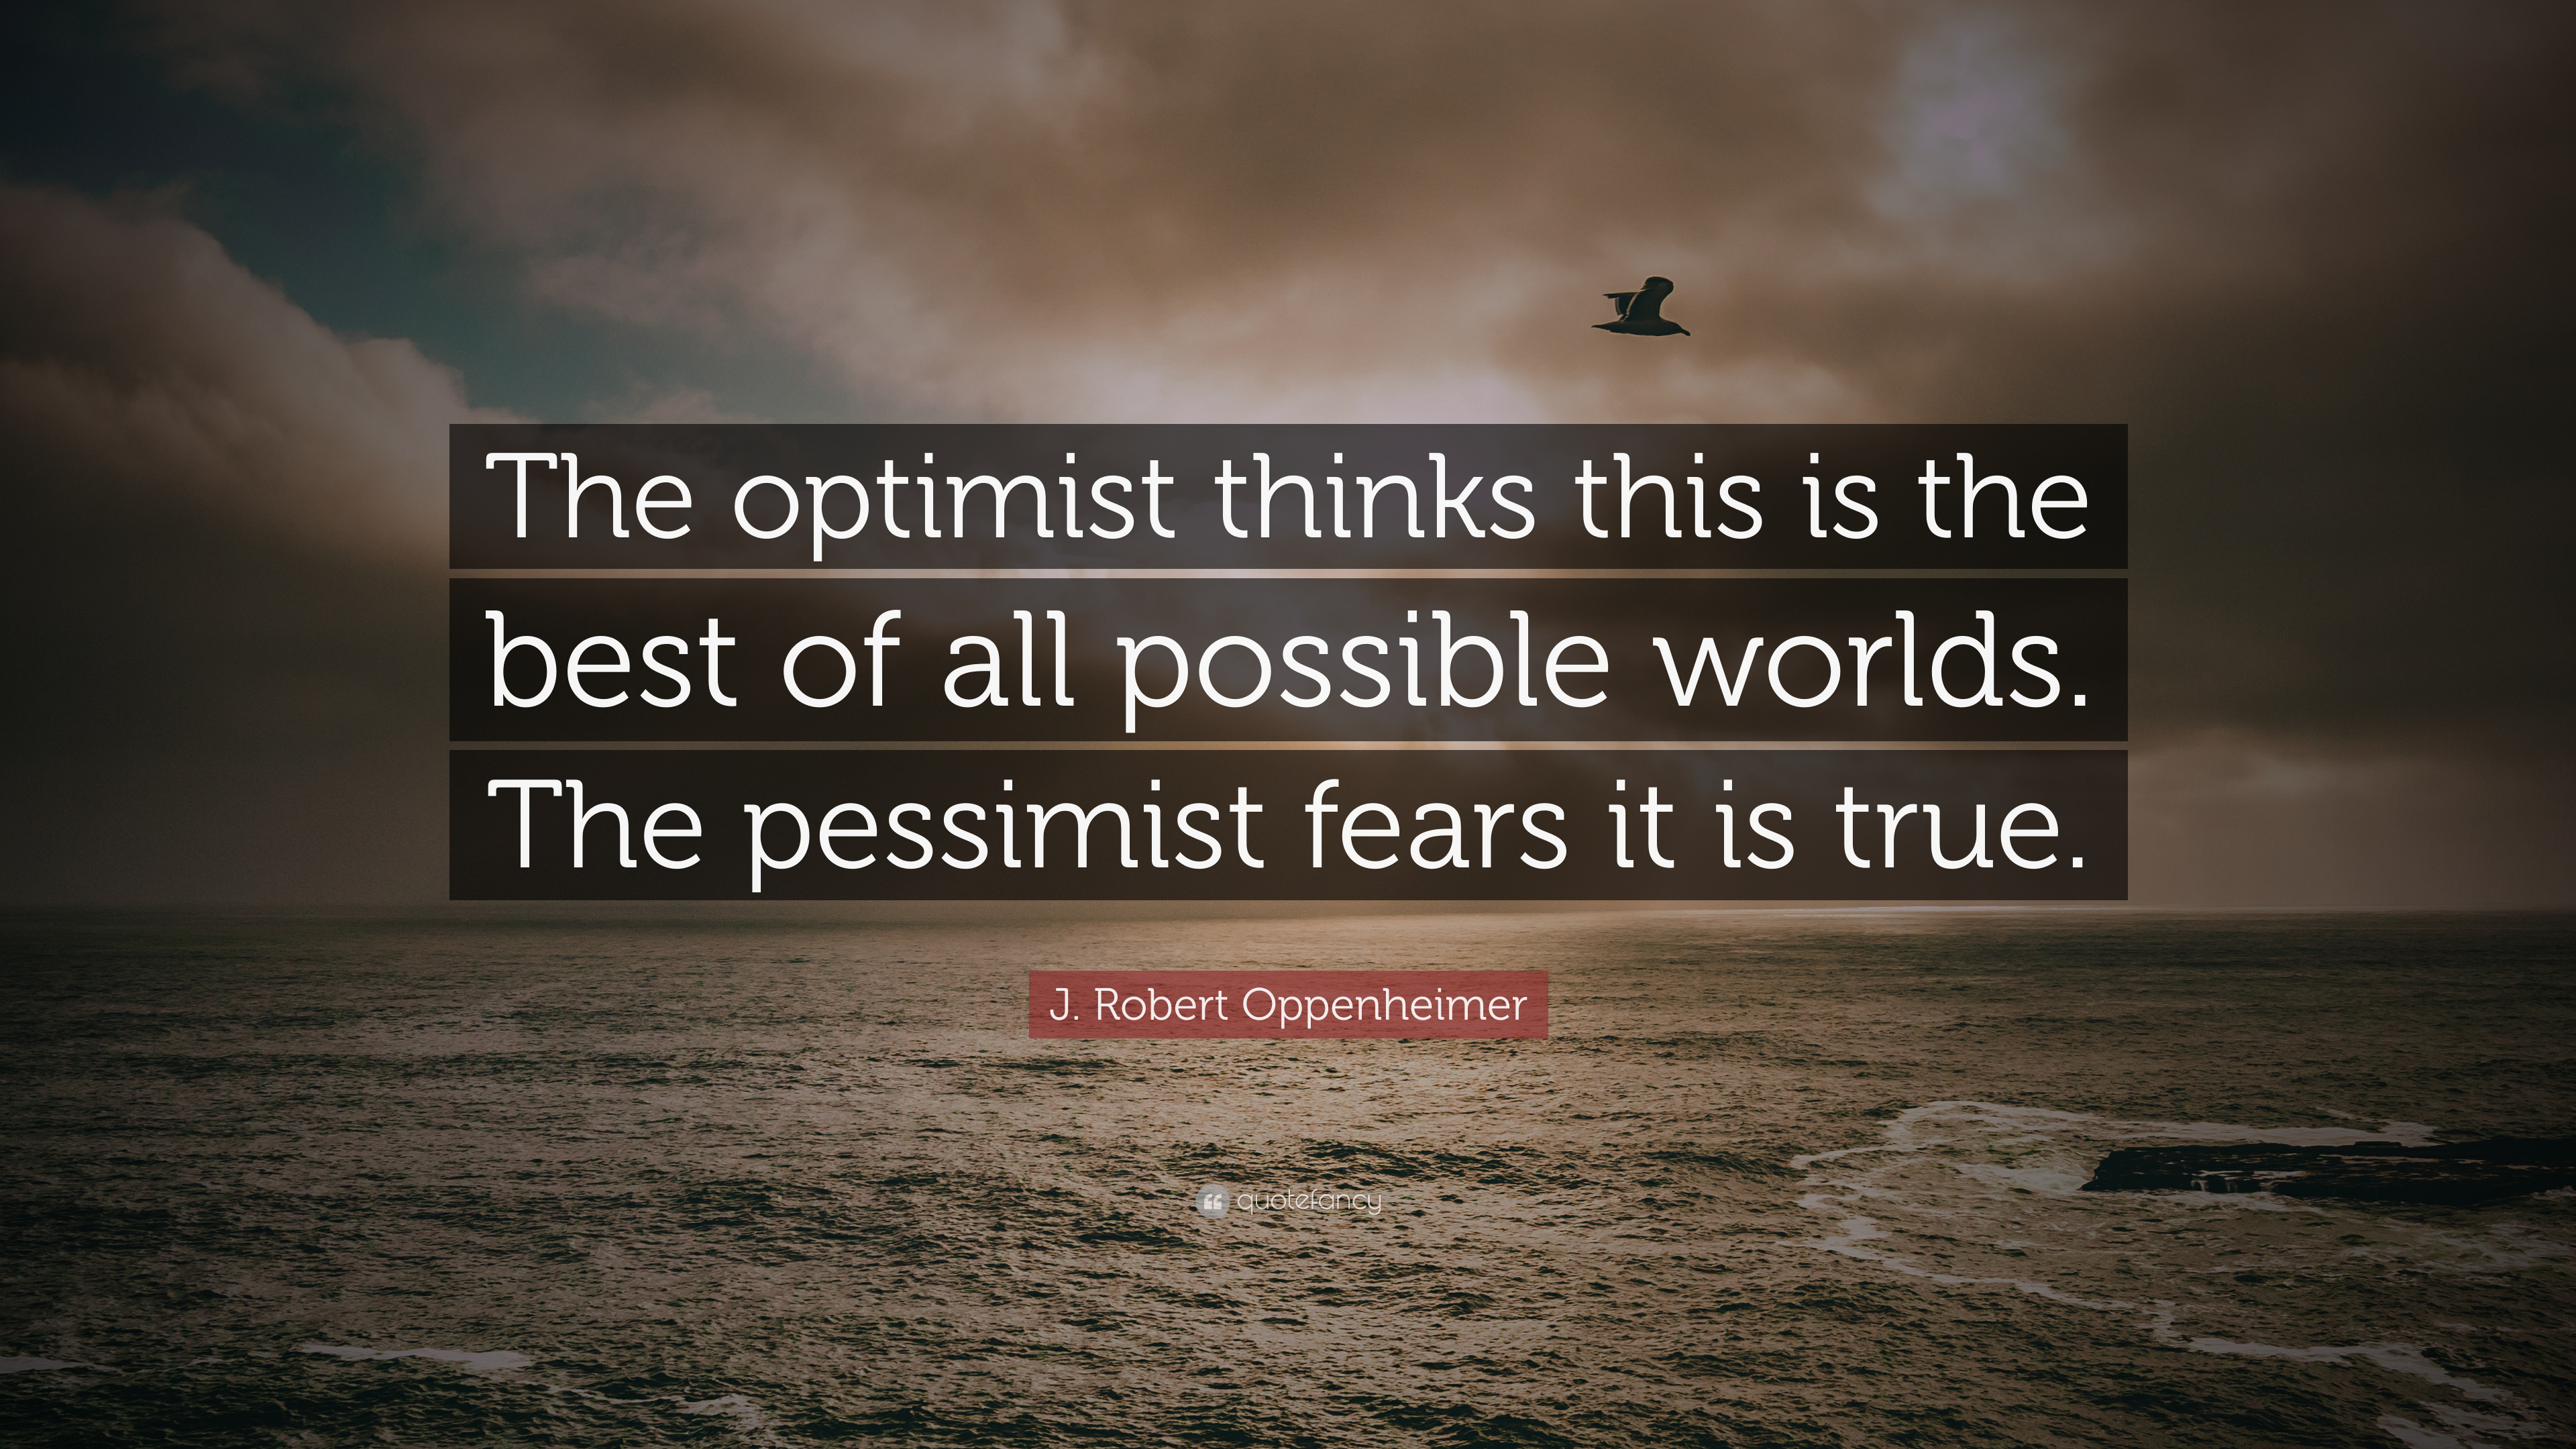 J. Robert Oppenheimer Quote: “The optimist thinks this is the best of all possible worlds. The